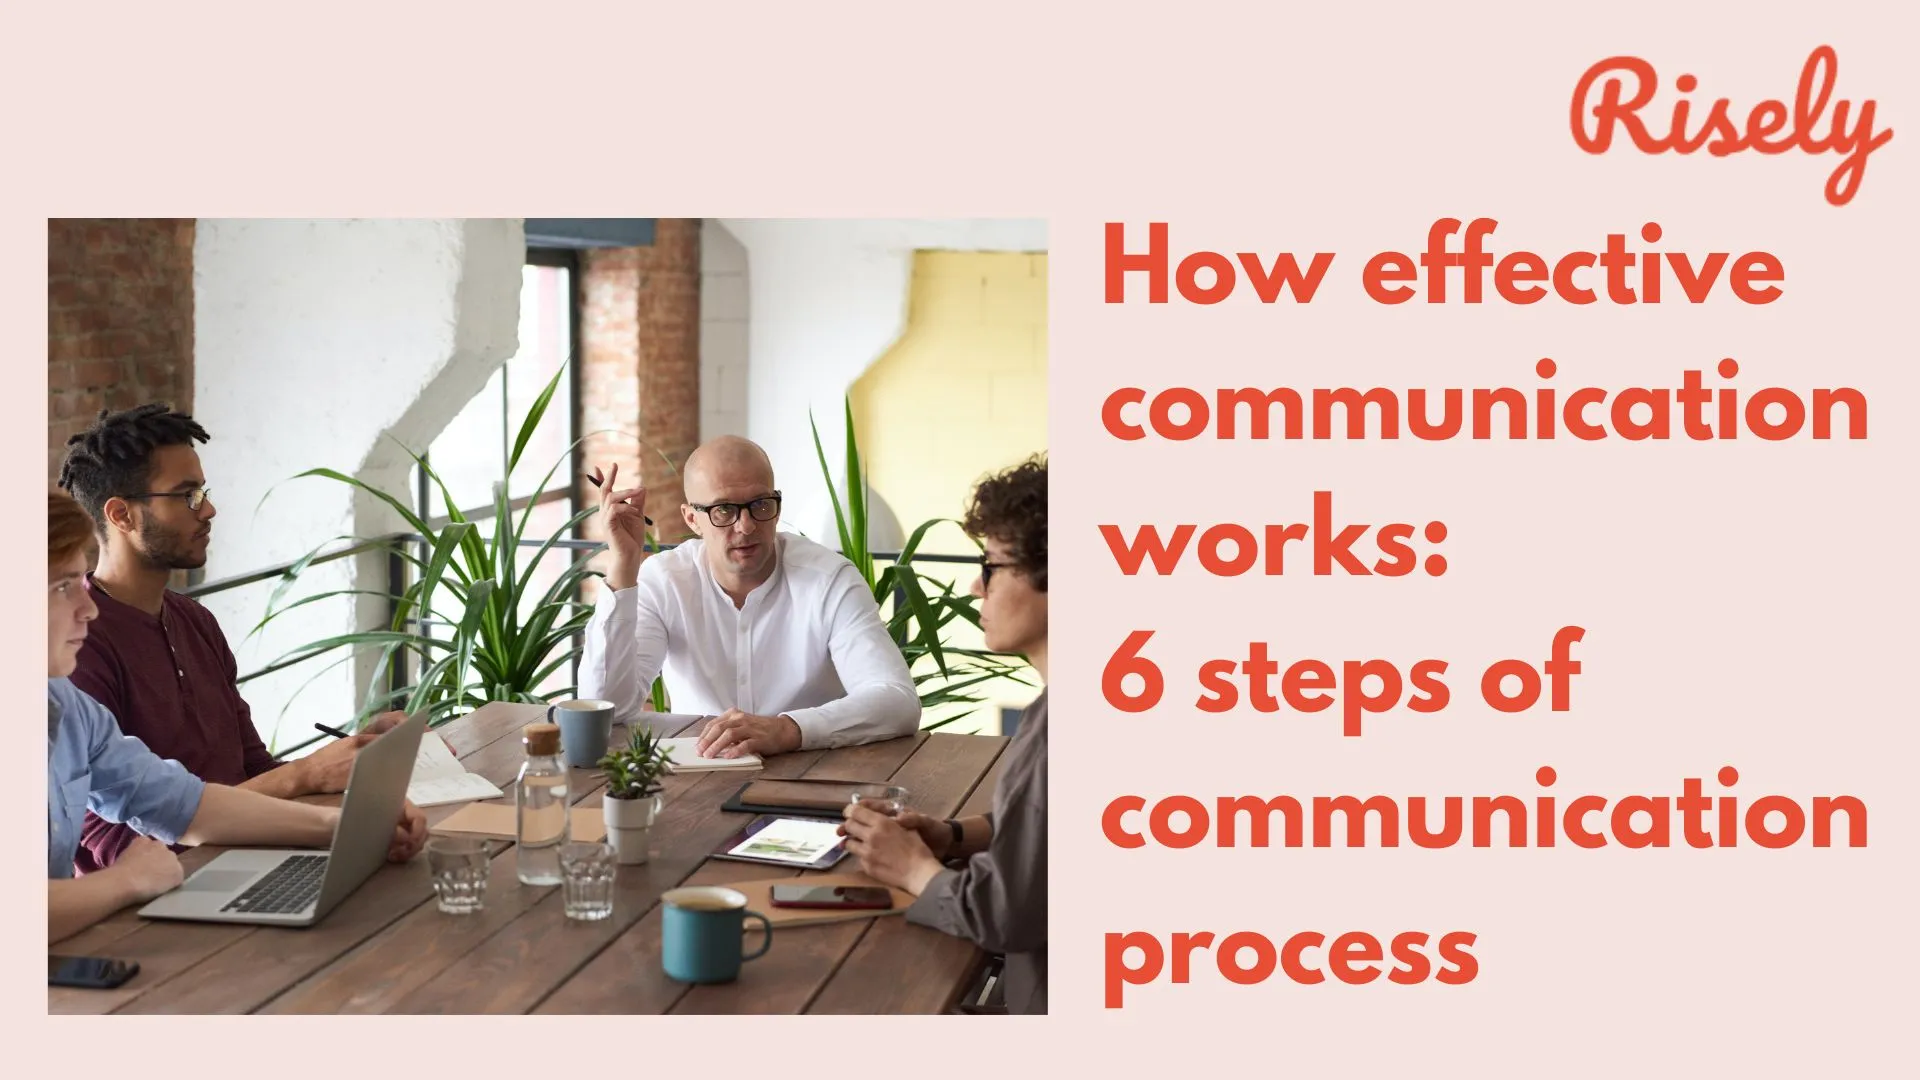 How effective communication works: 6 steps of communication process